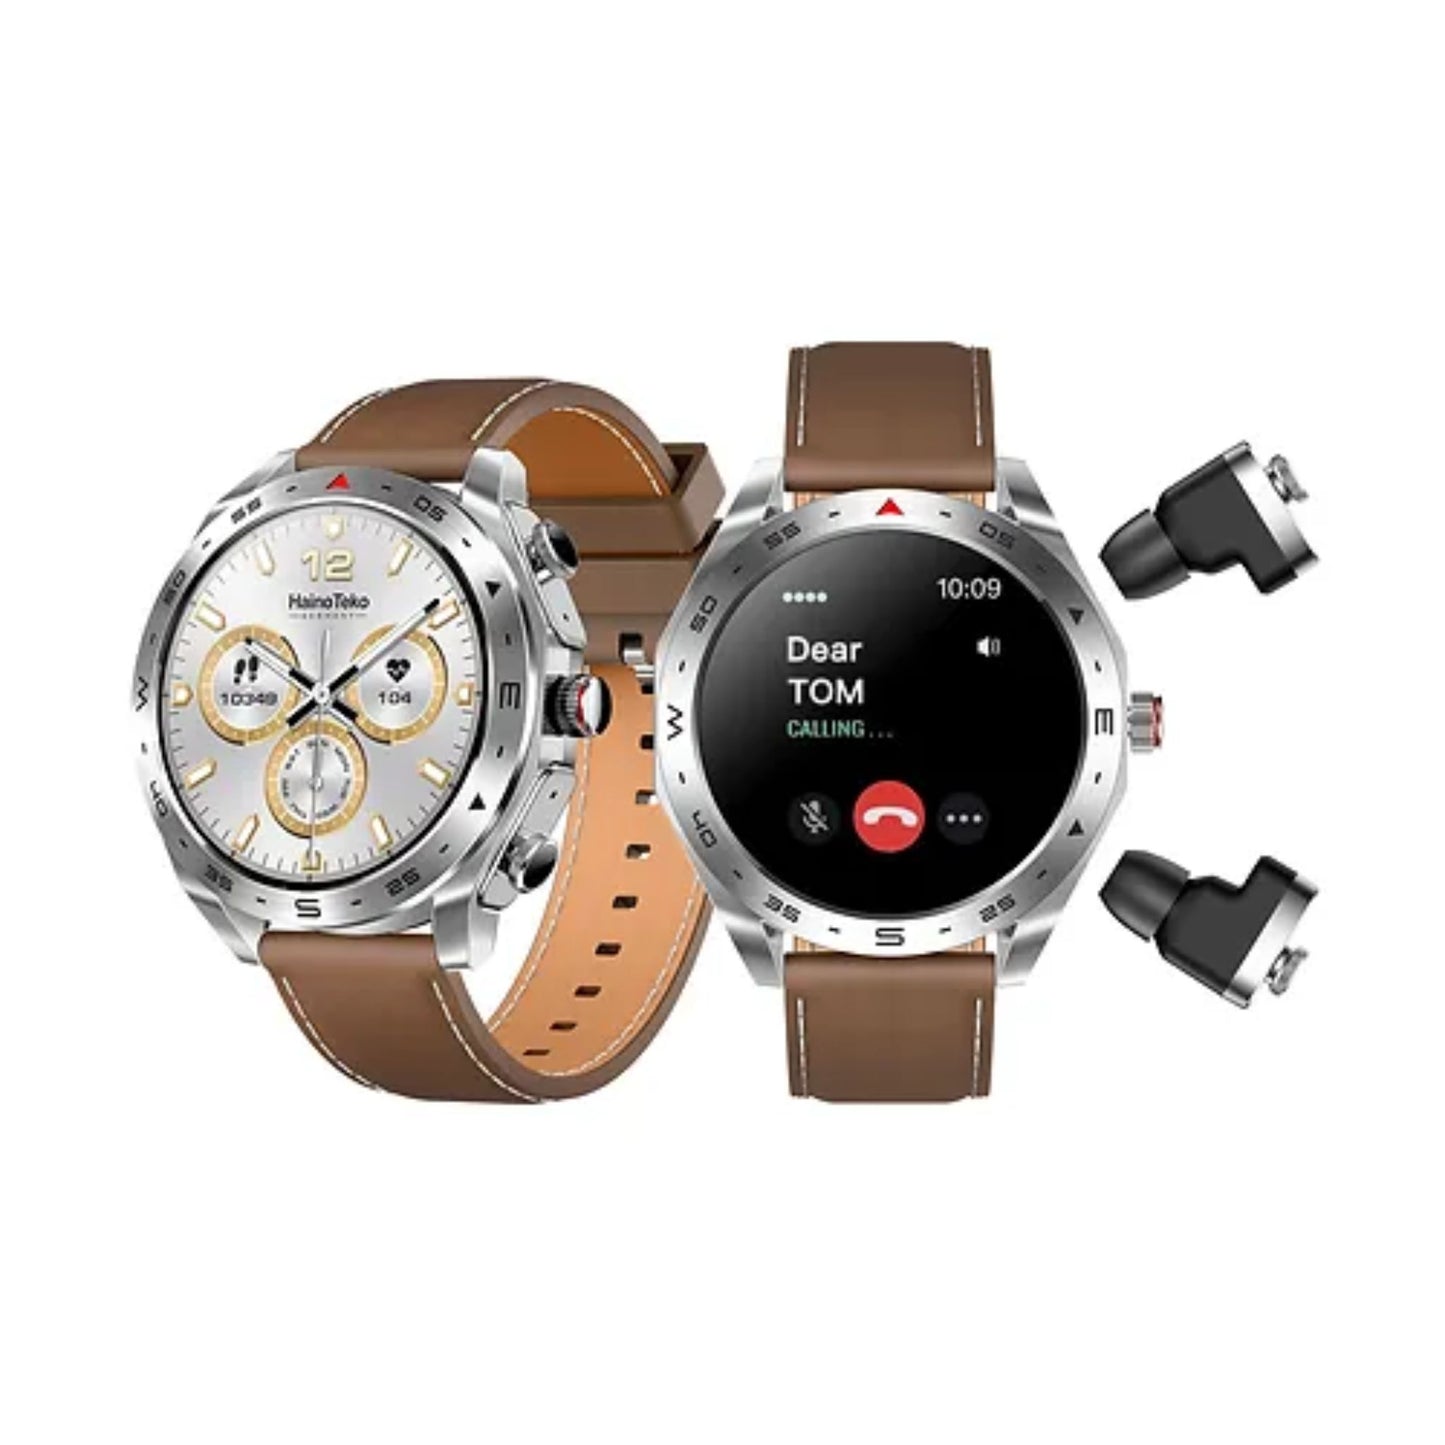 Premium ST-5 Watch Buds With Large Screen Round Shape AMOLED Display for Ladies and Gents_silver